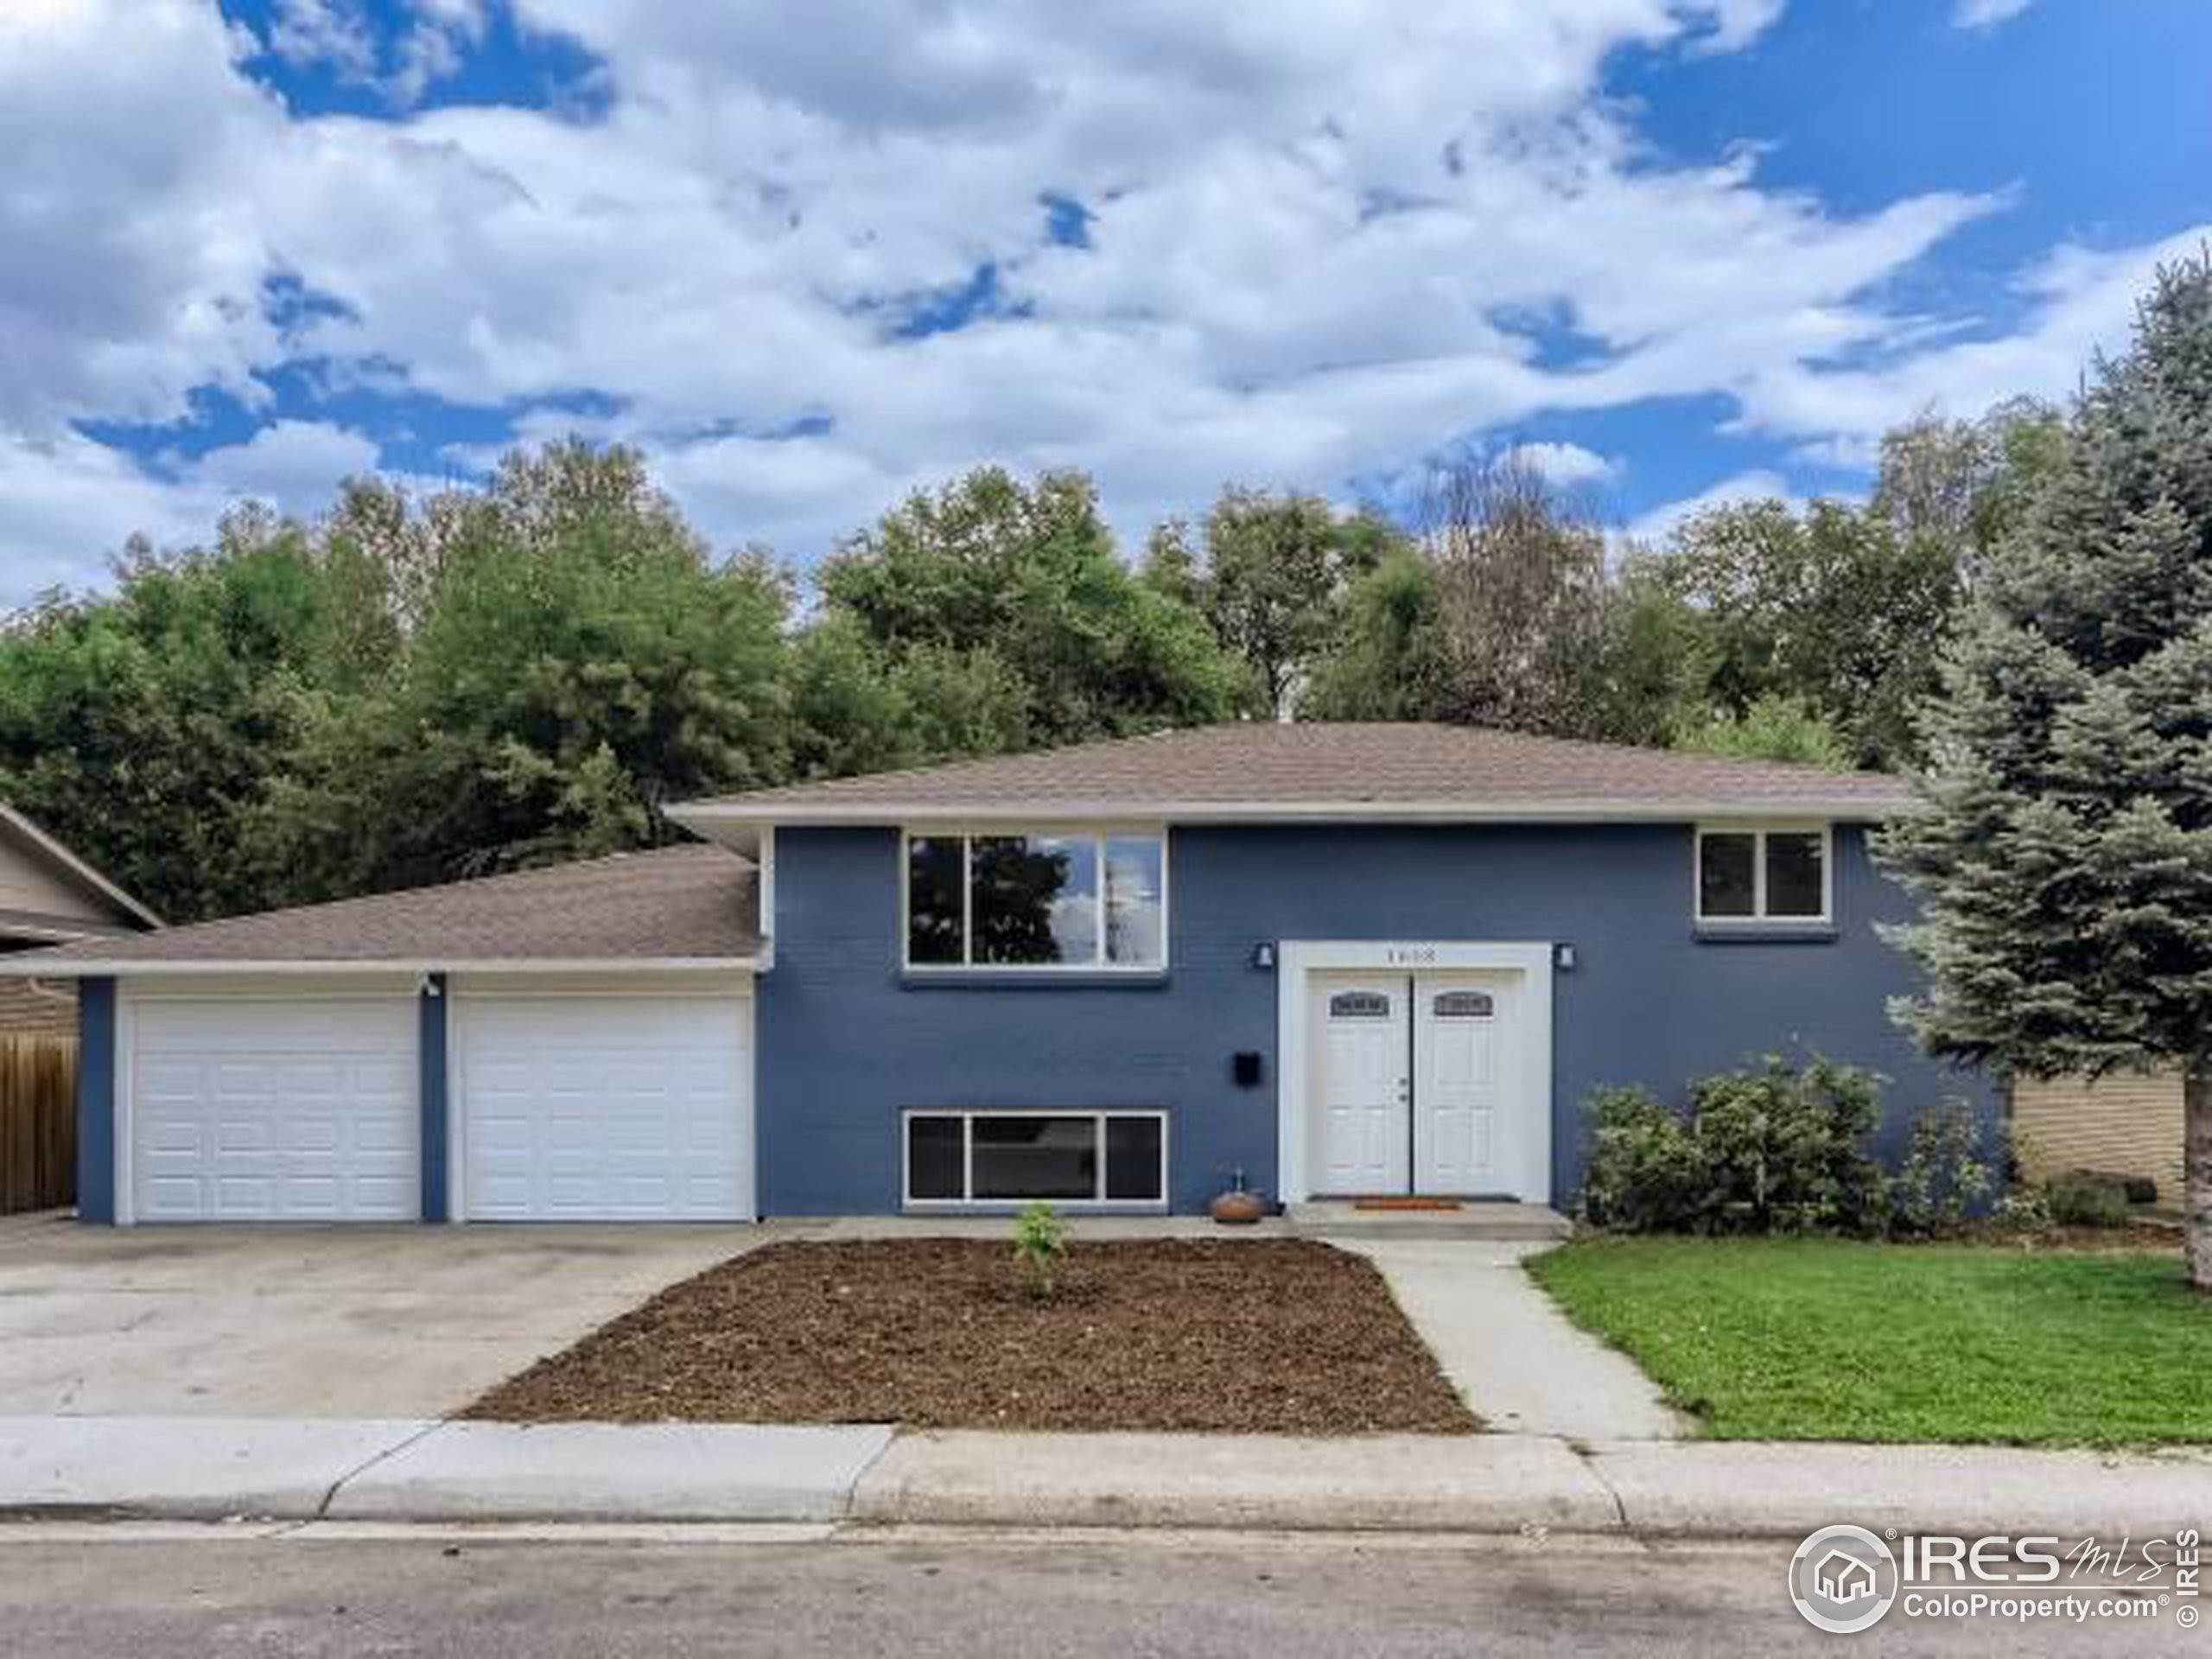 2. Single Family Homes for Active at 1618 Kimbark Street Longmont, Colorado 80501 United States